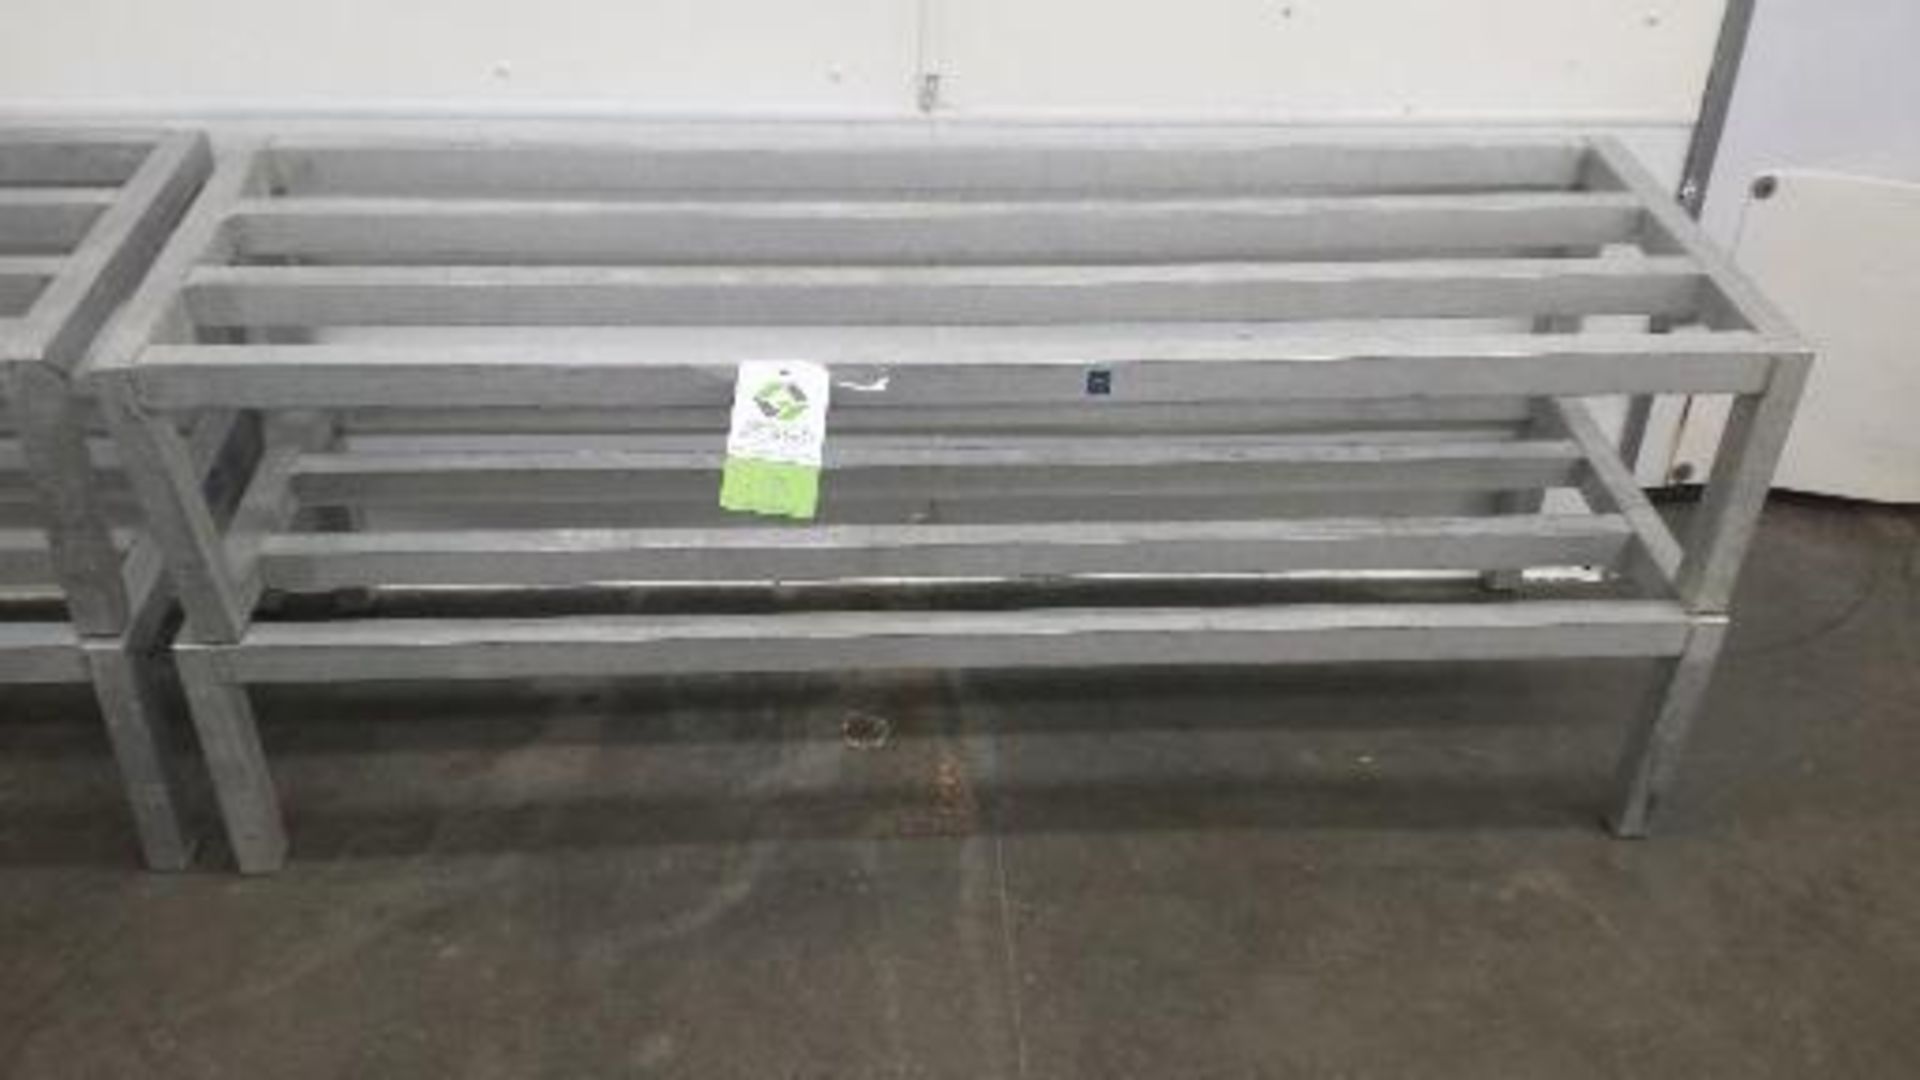 (2) Aluminum product Racks 5'L x 20''W x 1'H (LOT), Located in North Dakota (NOT OWNED BY